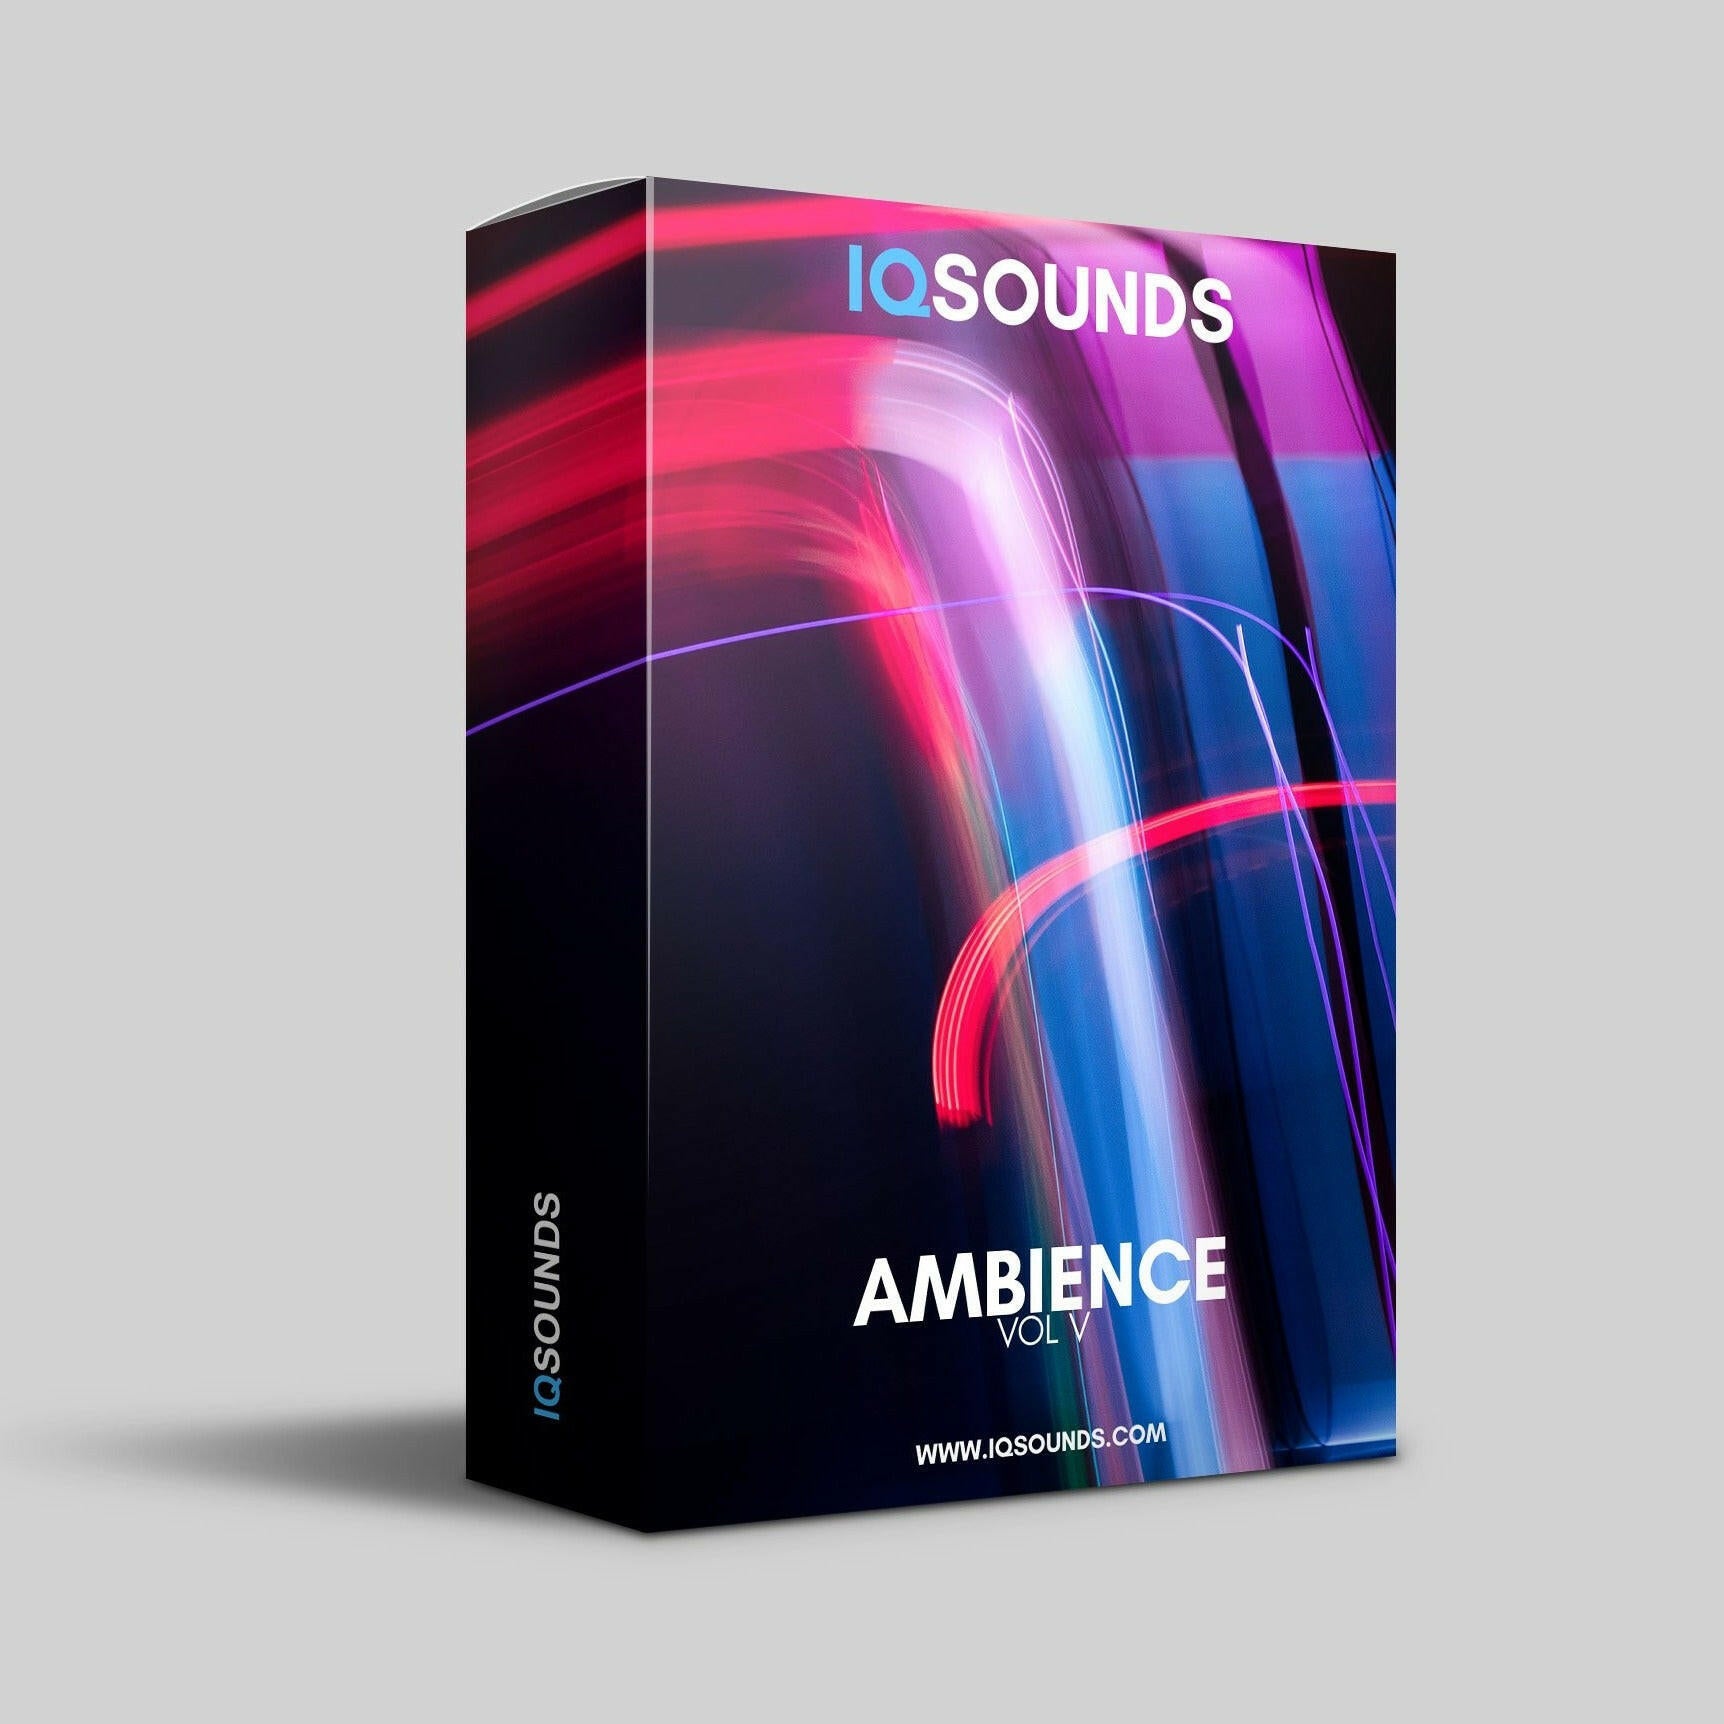 iqsounds, iq sounds, iqsounds sample pack, iqsounds samples, ableton samples, fl studio sample pack, sound fx samples, sound fx, royalty free samples, cinematic samples